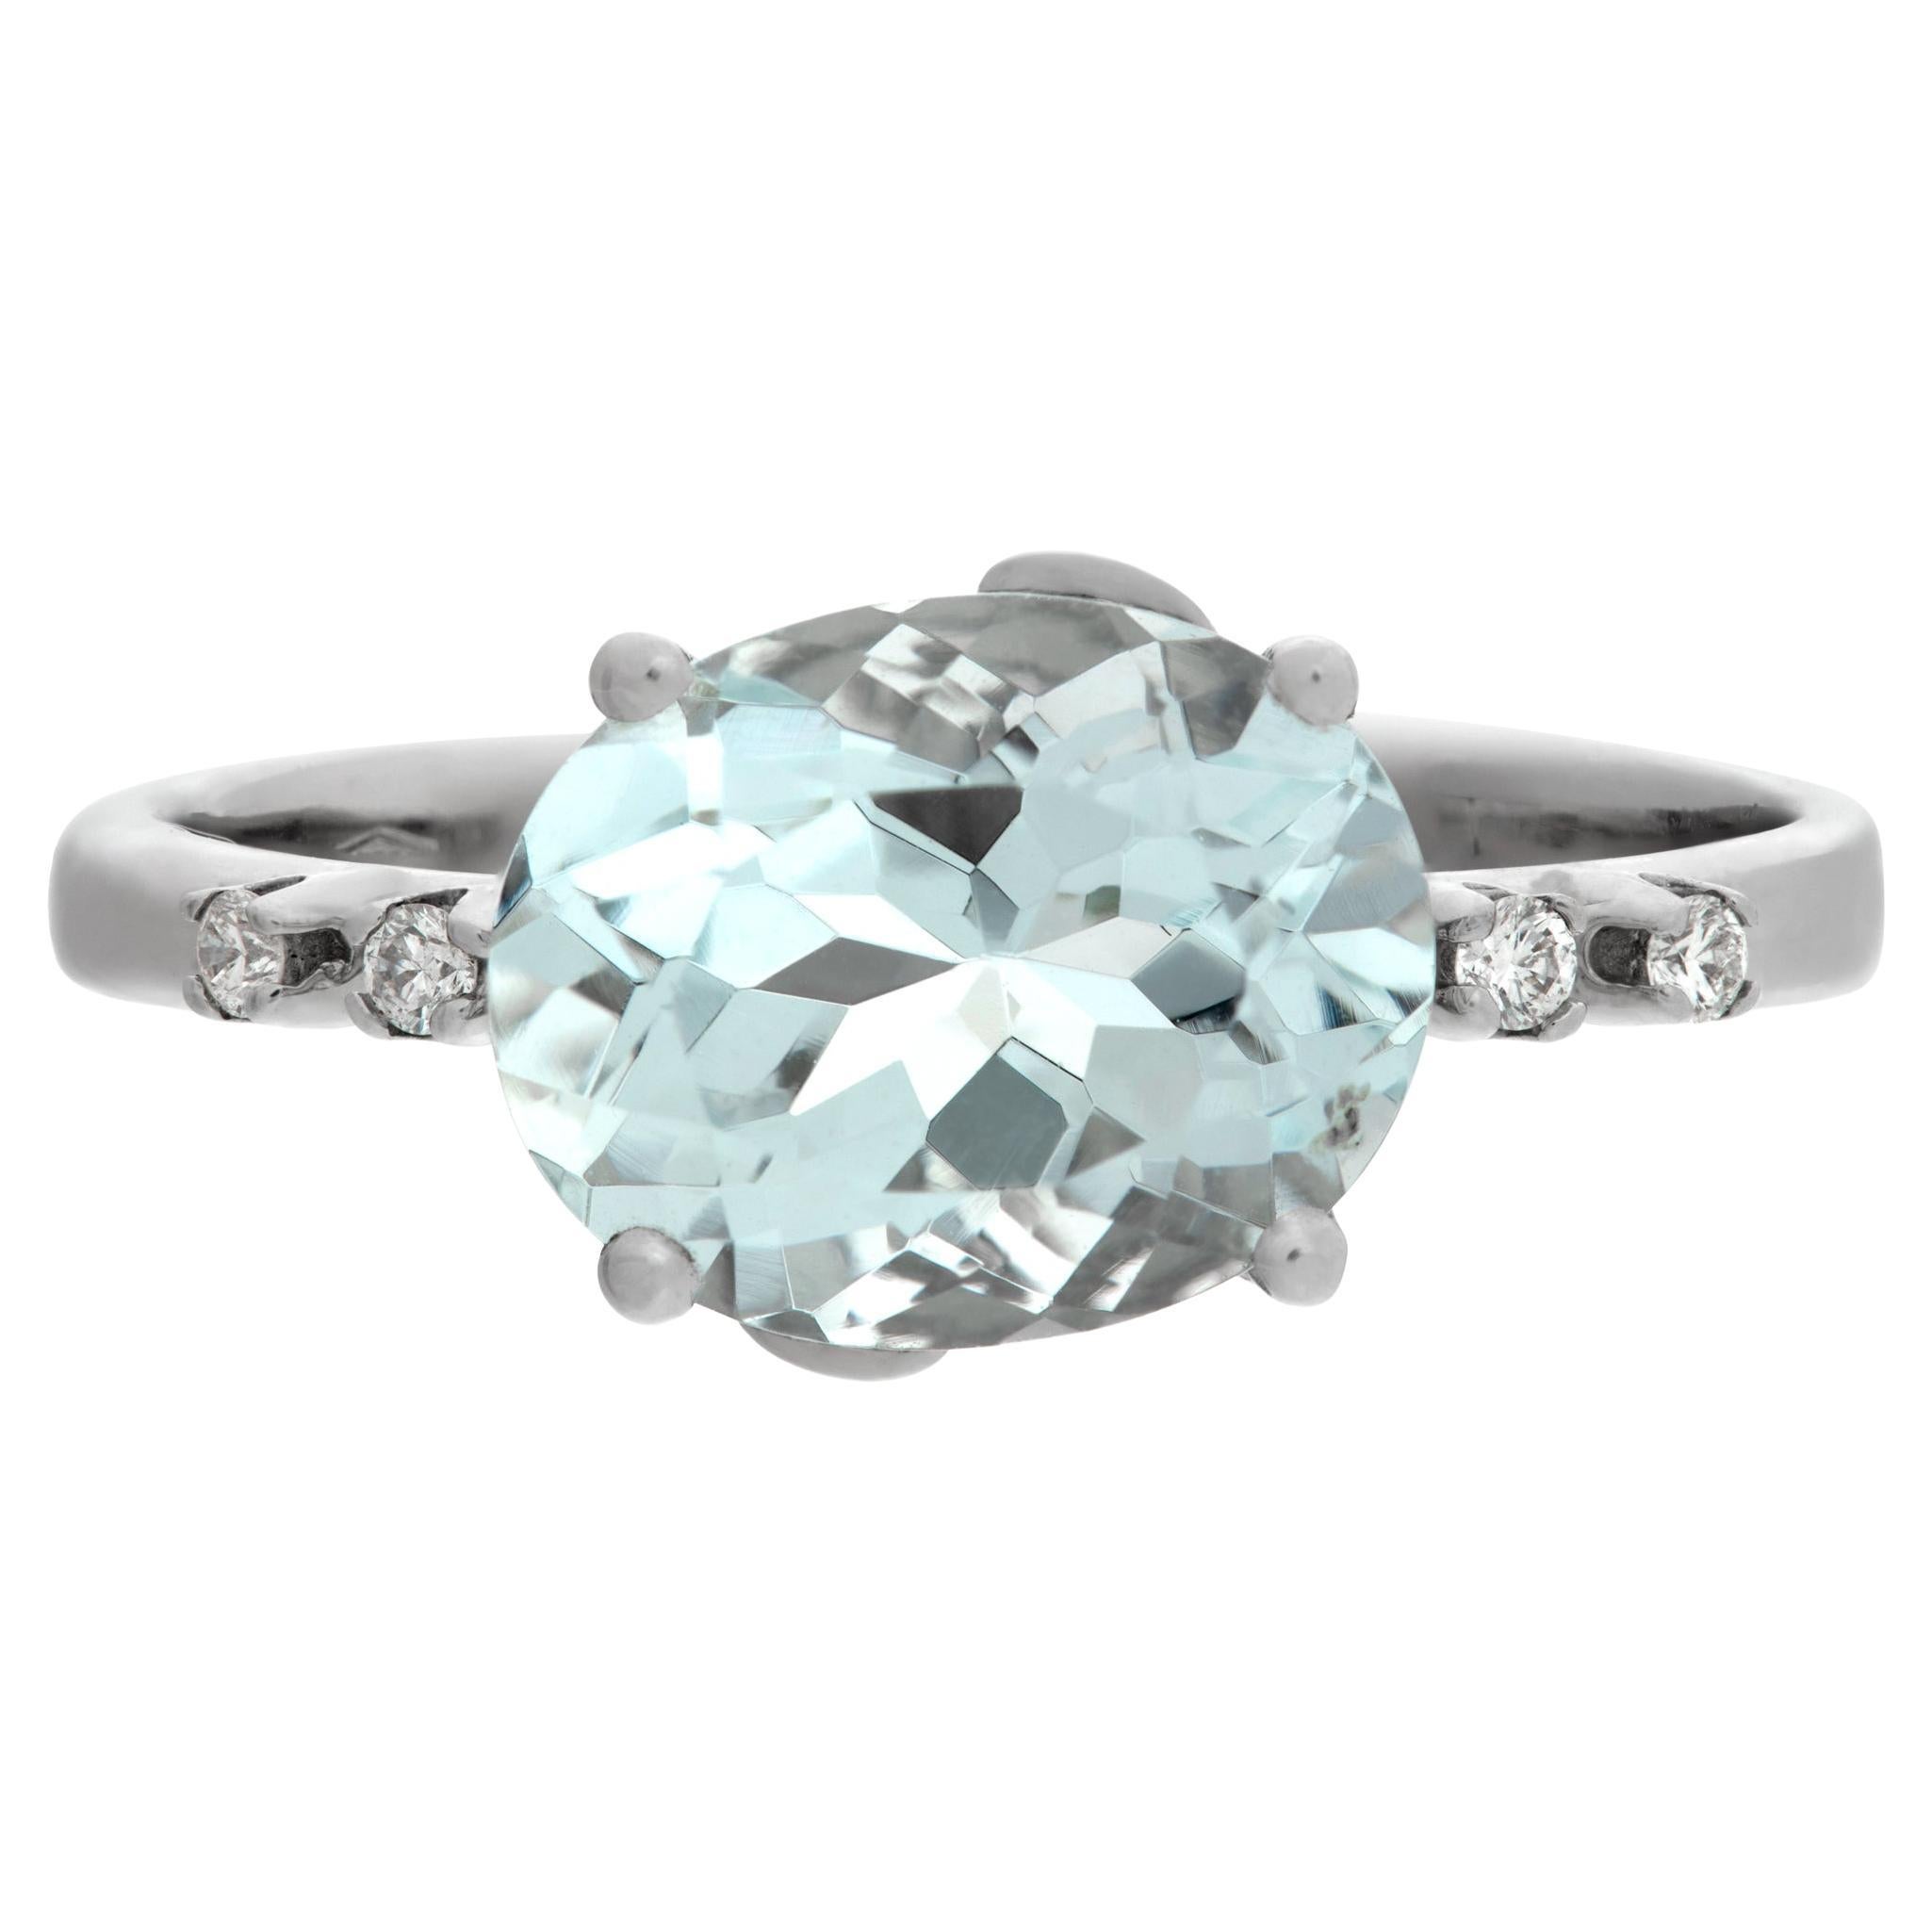 White Gold oval cut Aquamarine ring with diamonds accents